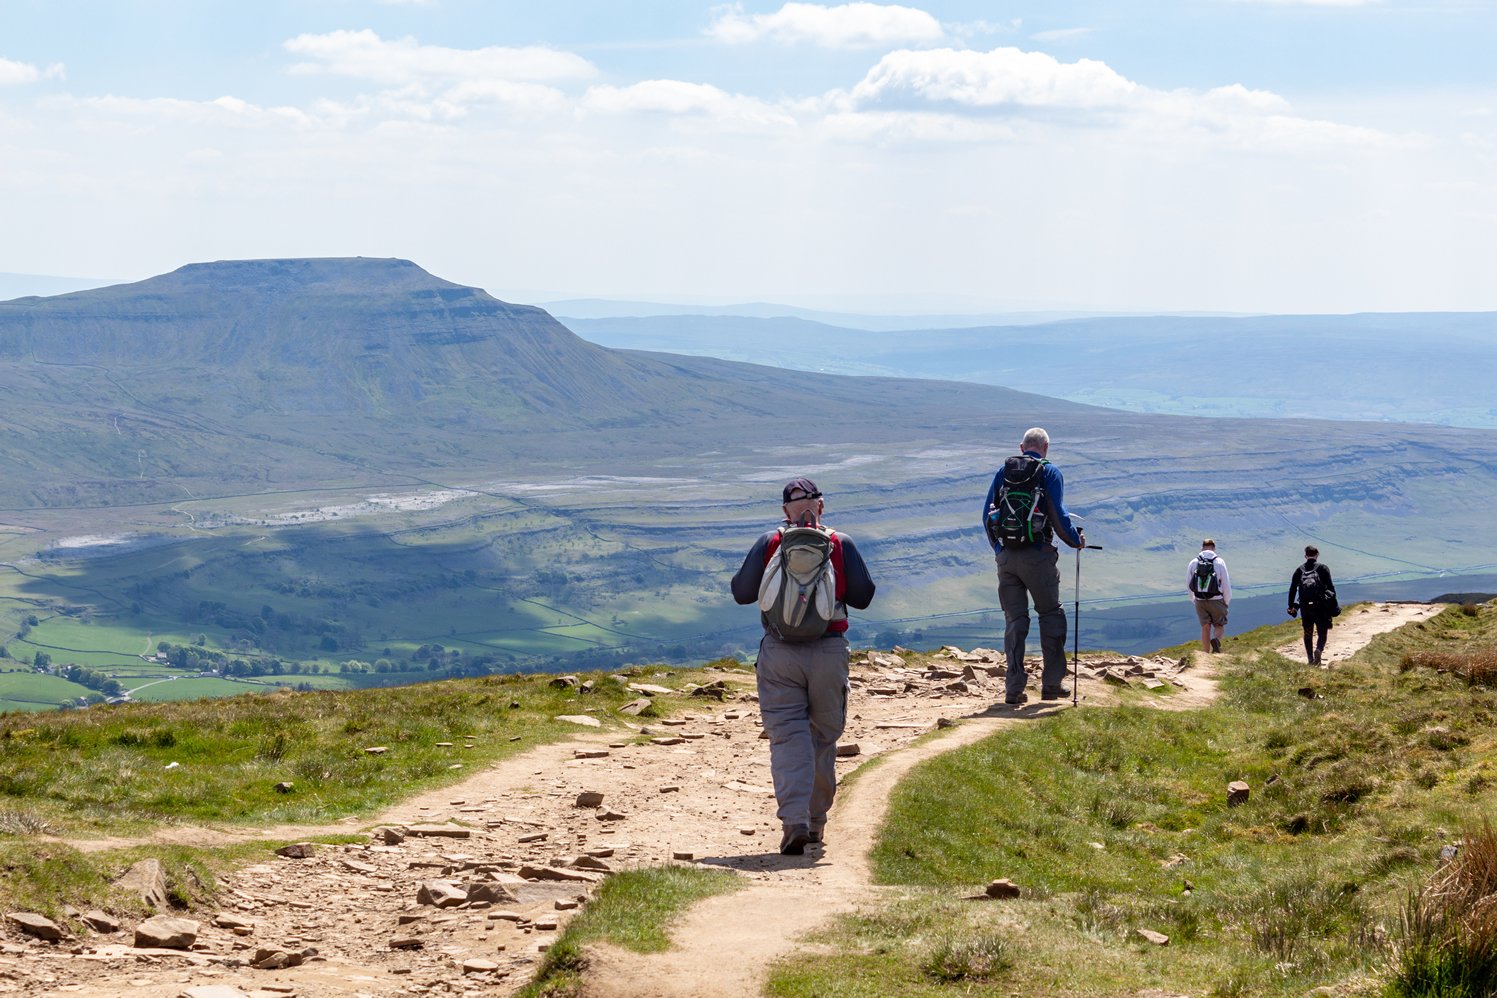 Image name walkers descending whernside view of ingleborough sunny yorkshire the 12 image from the post Stride Out in Yorkshire: Celebrate National Walking Day in Yorkshire.com.